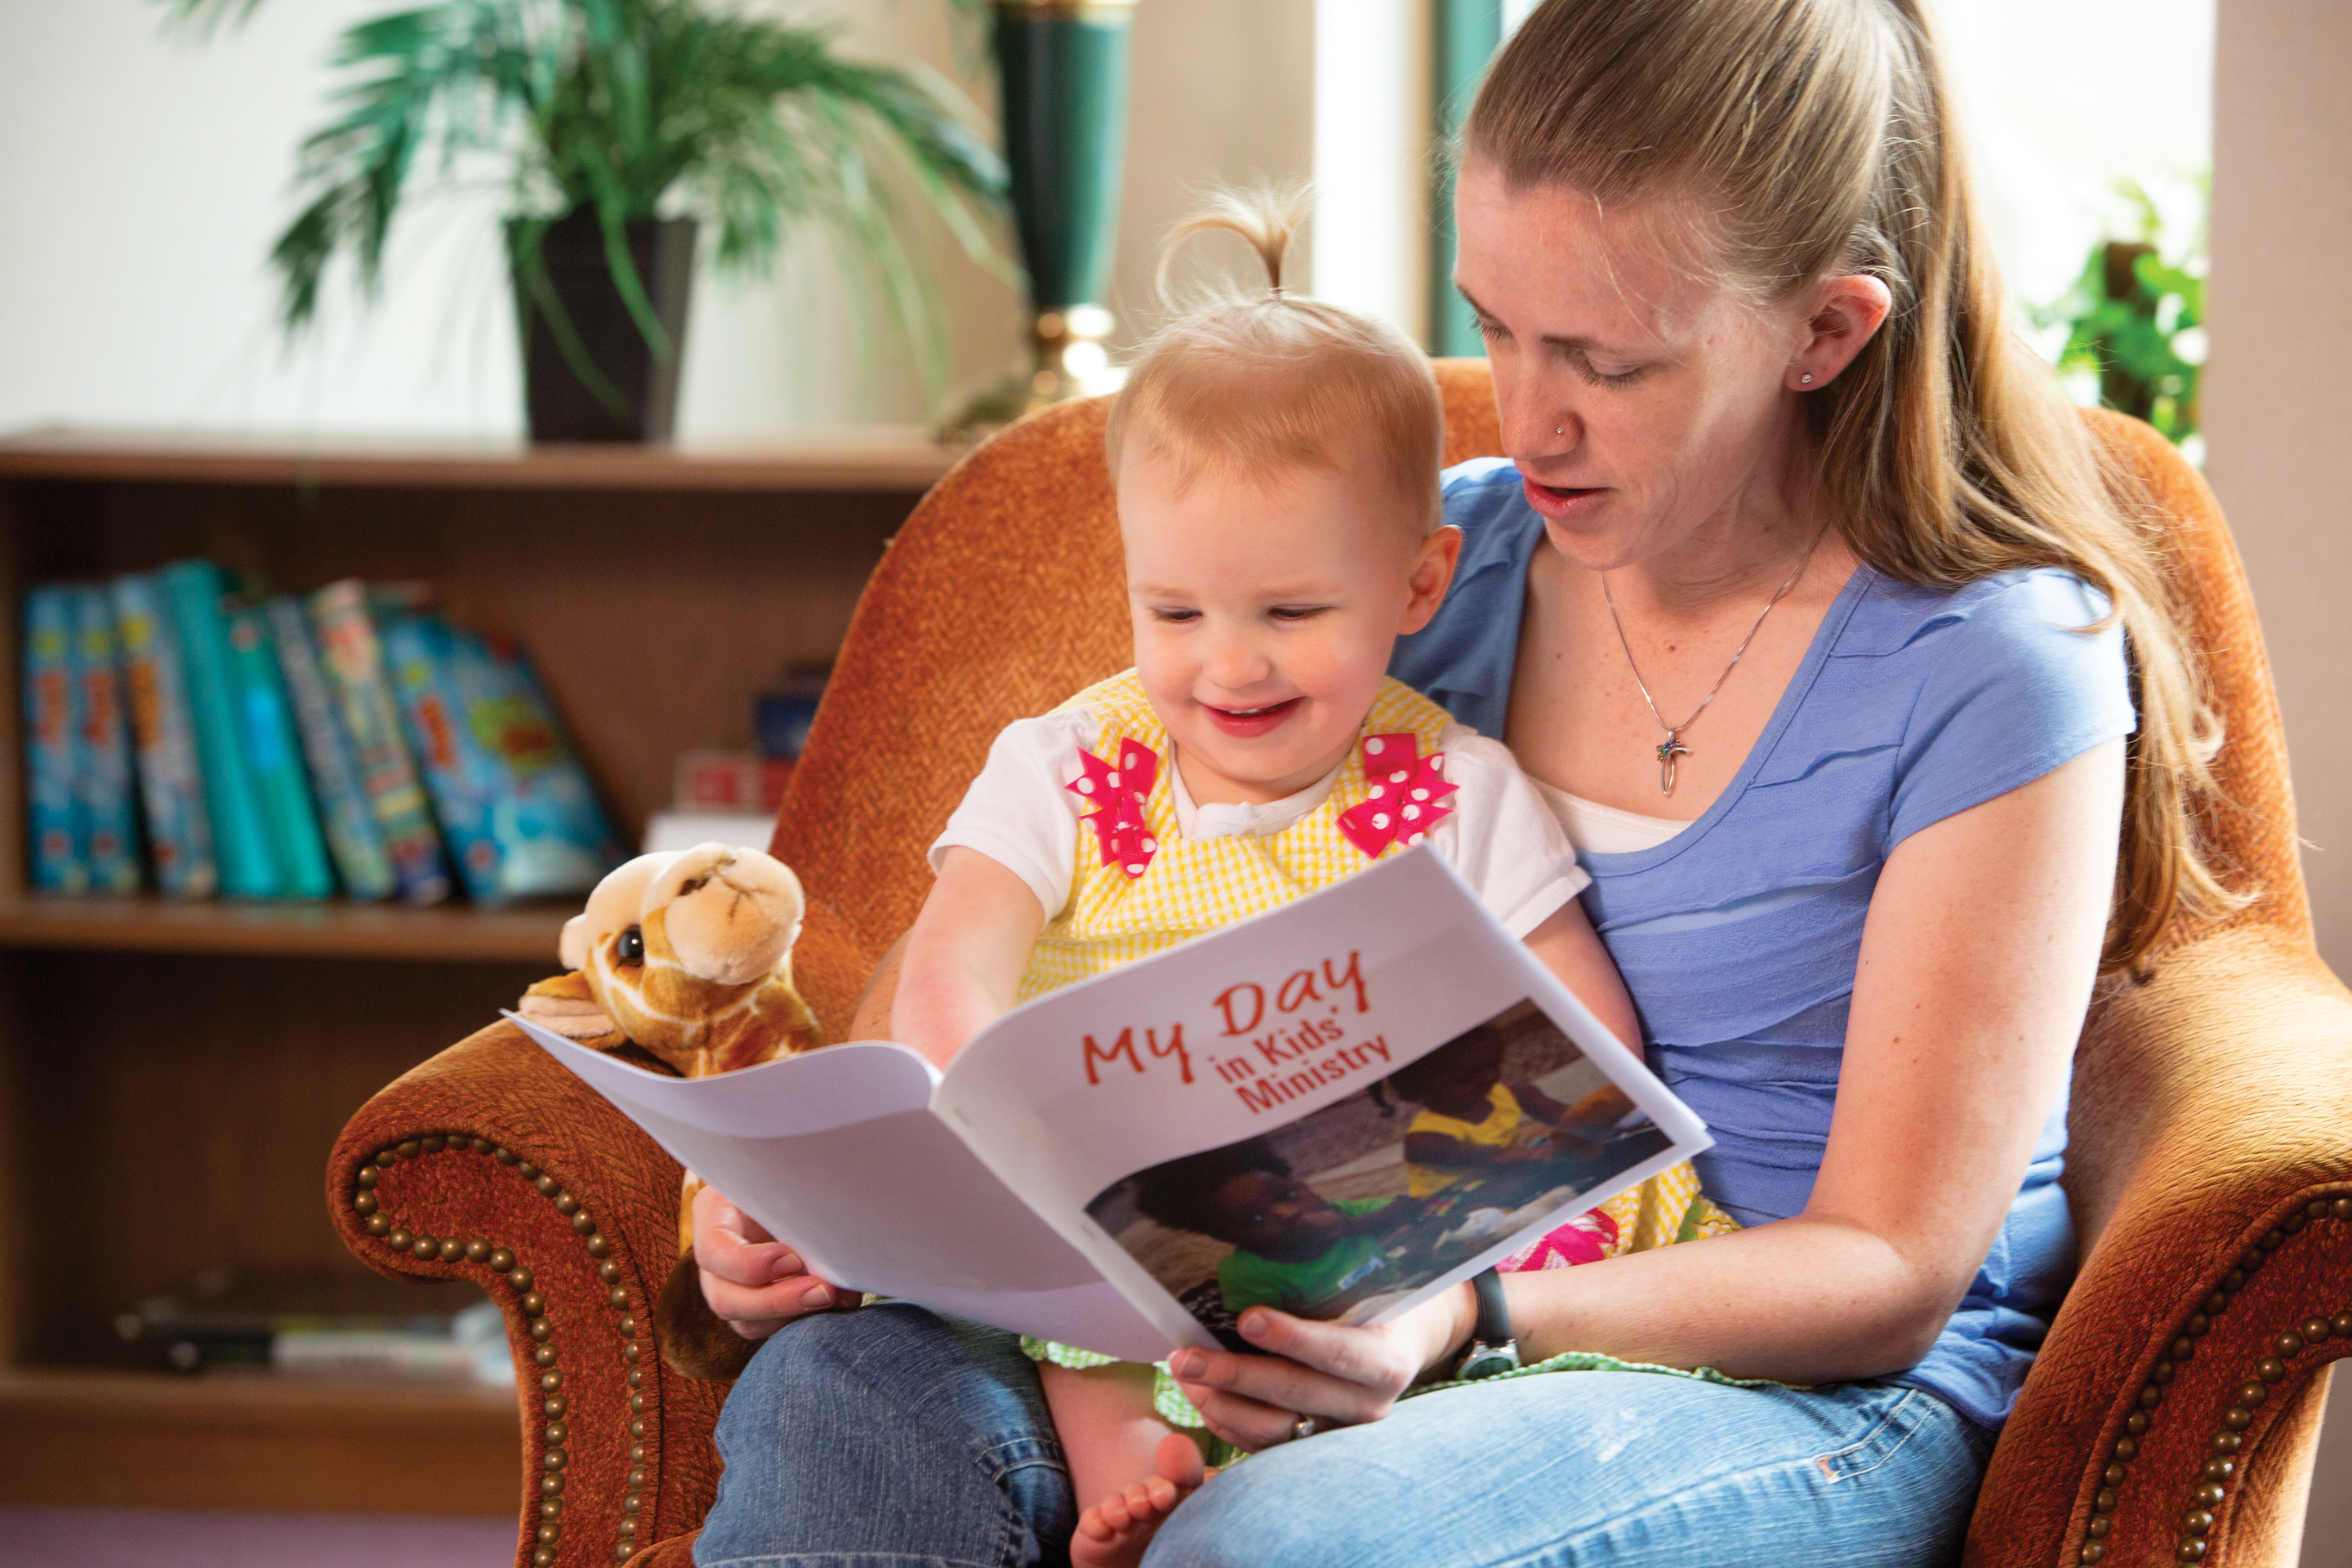 A mom is sitting in an arm chair with her two year old daughter on her lap. She is reading a "My Day in Kid's Ministry" book.